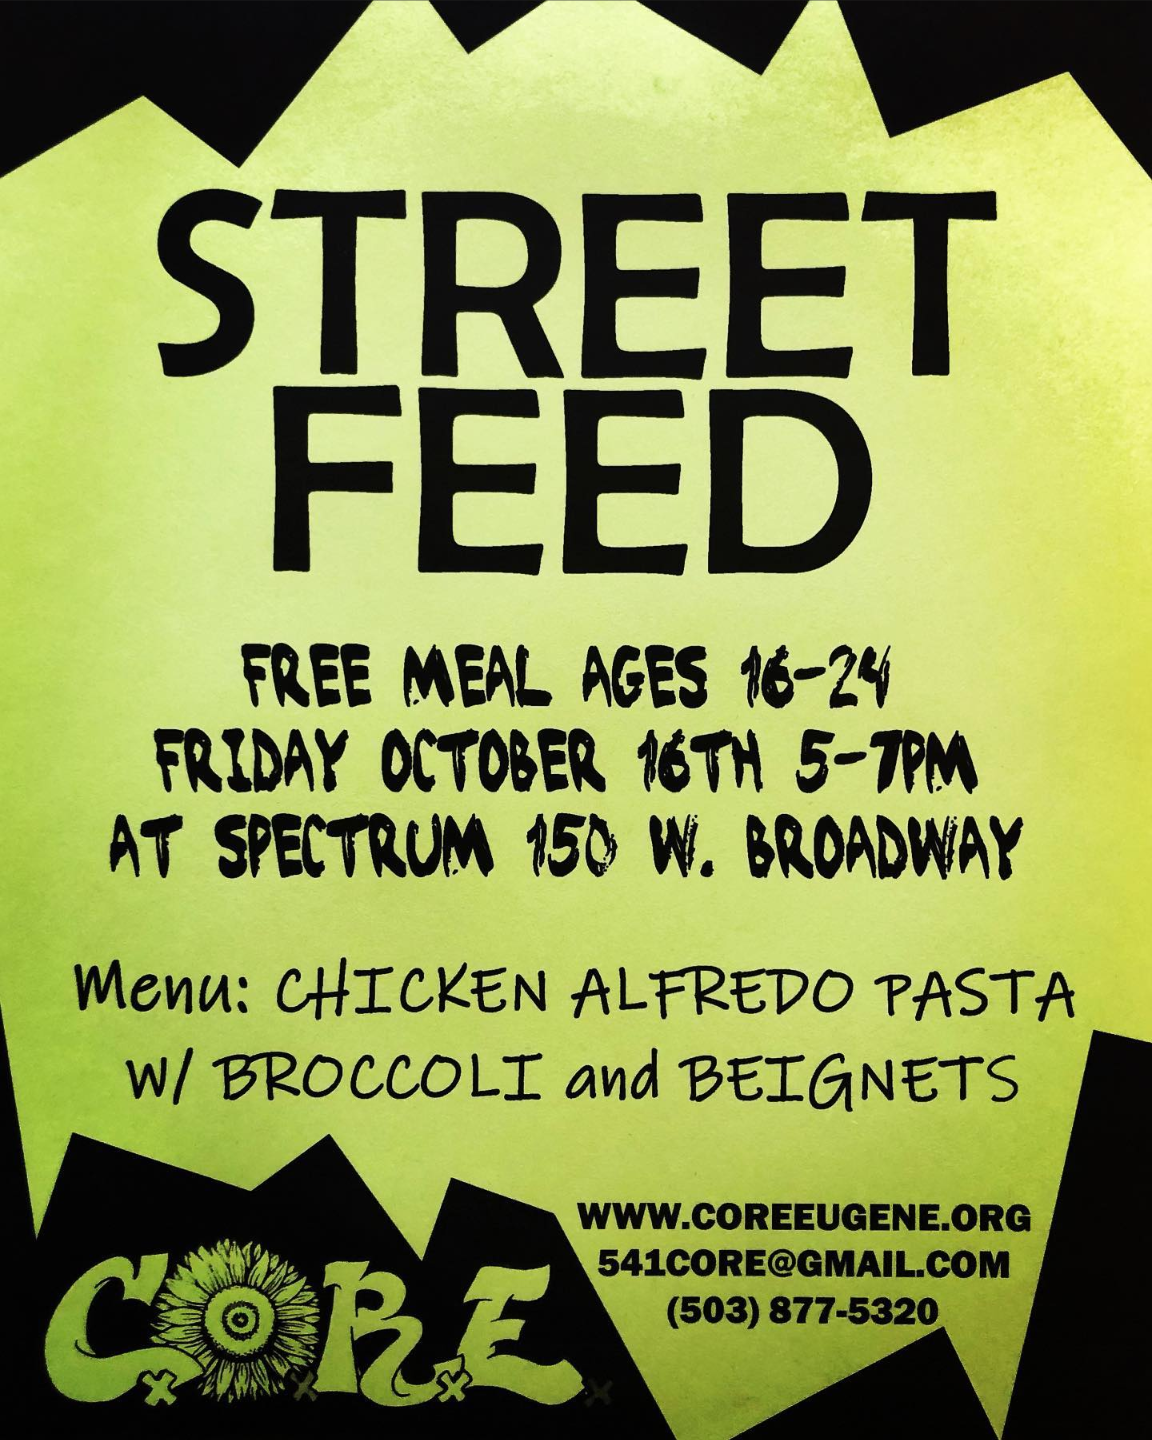 STREET FEED FREE MEAL AGES 16-24 FRIDAY OCTOBER 16TH 5-7PM AT SPECTRUM 150 W. BROADWAY Menu: CHICKEN ALFREDO PASTA W/ BROCCOLI and BEIGNETS WWW.COREEUGENE.ORG 541CORE@GMAIL.COM (503) 877-5320